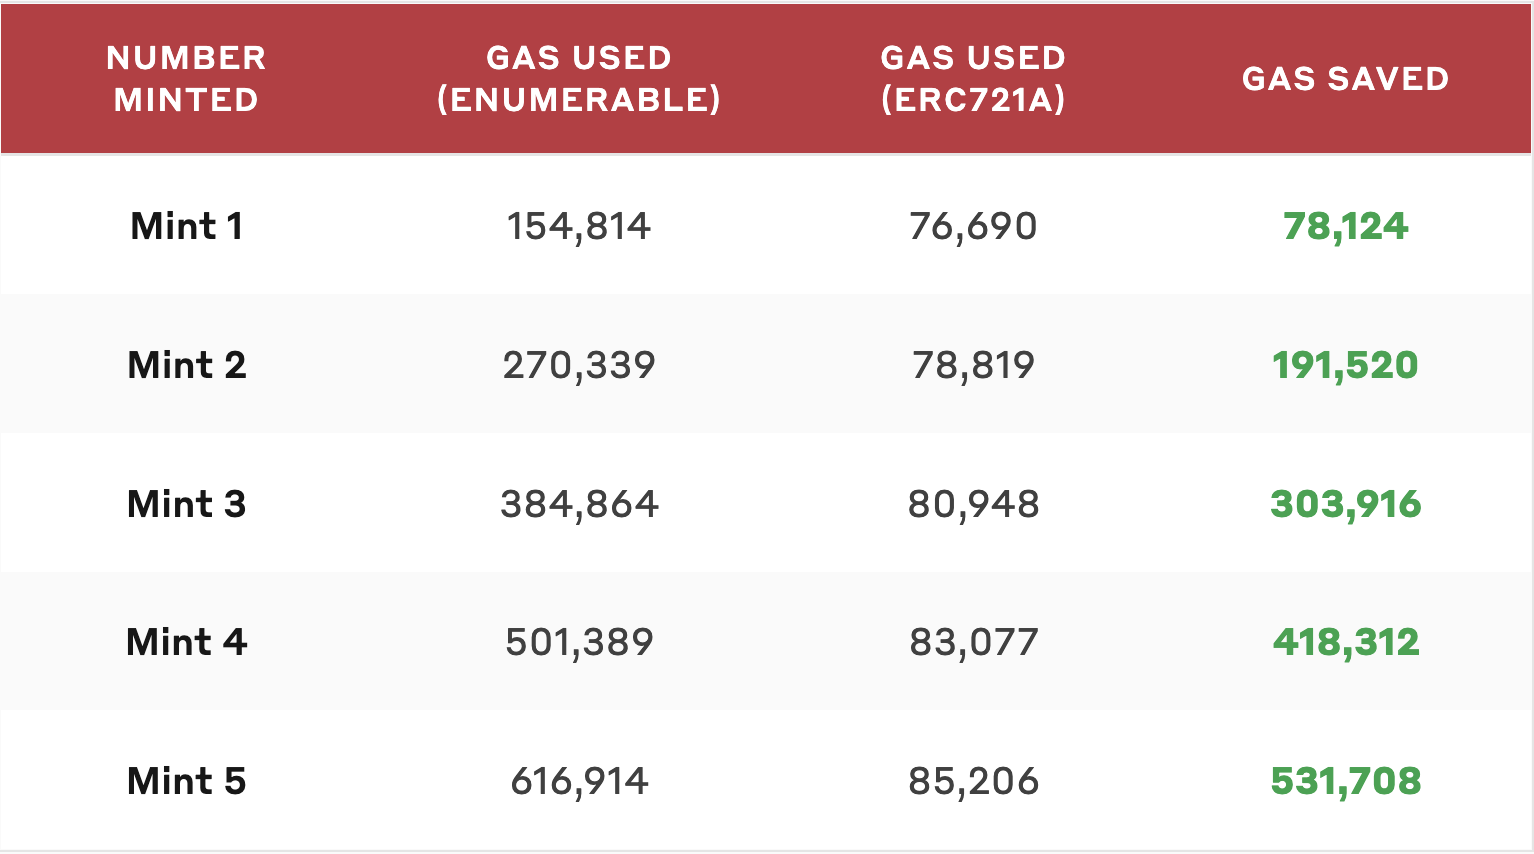 Gas used for ERC721A